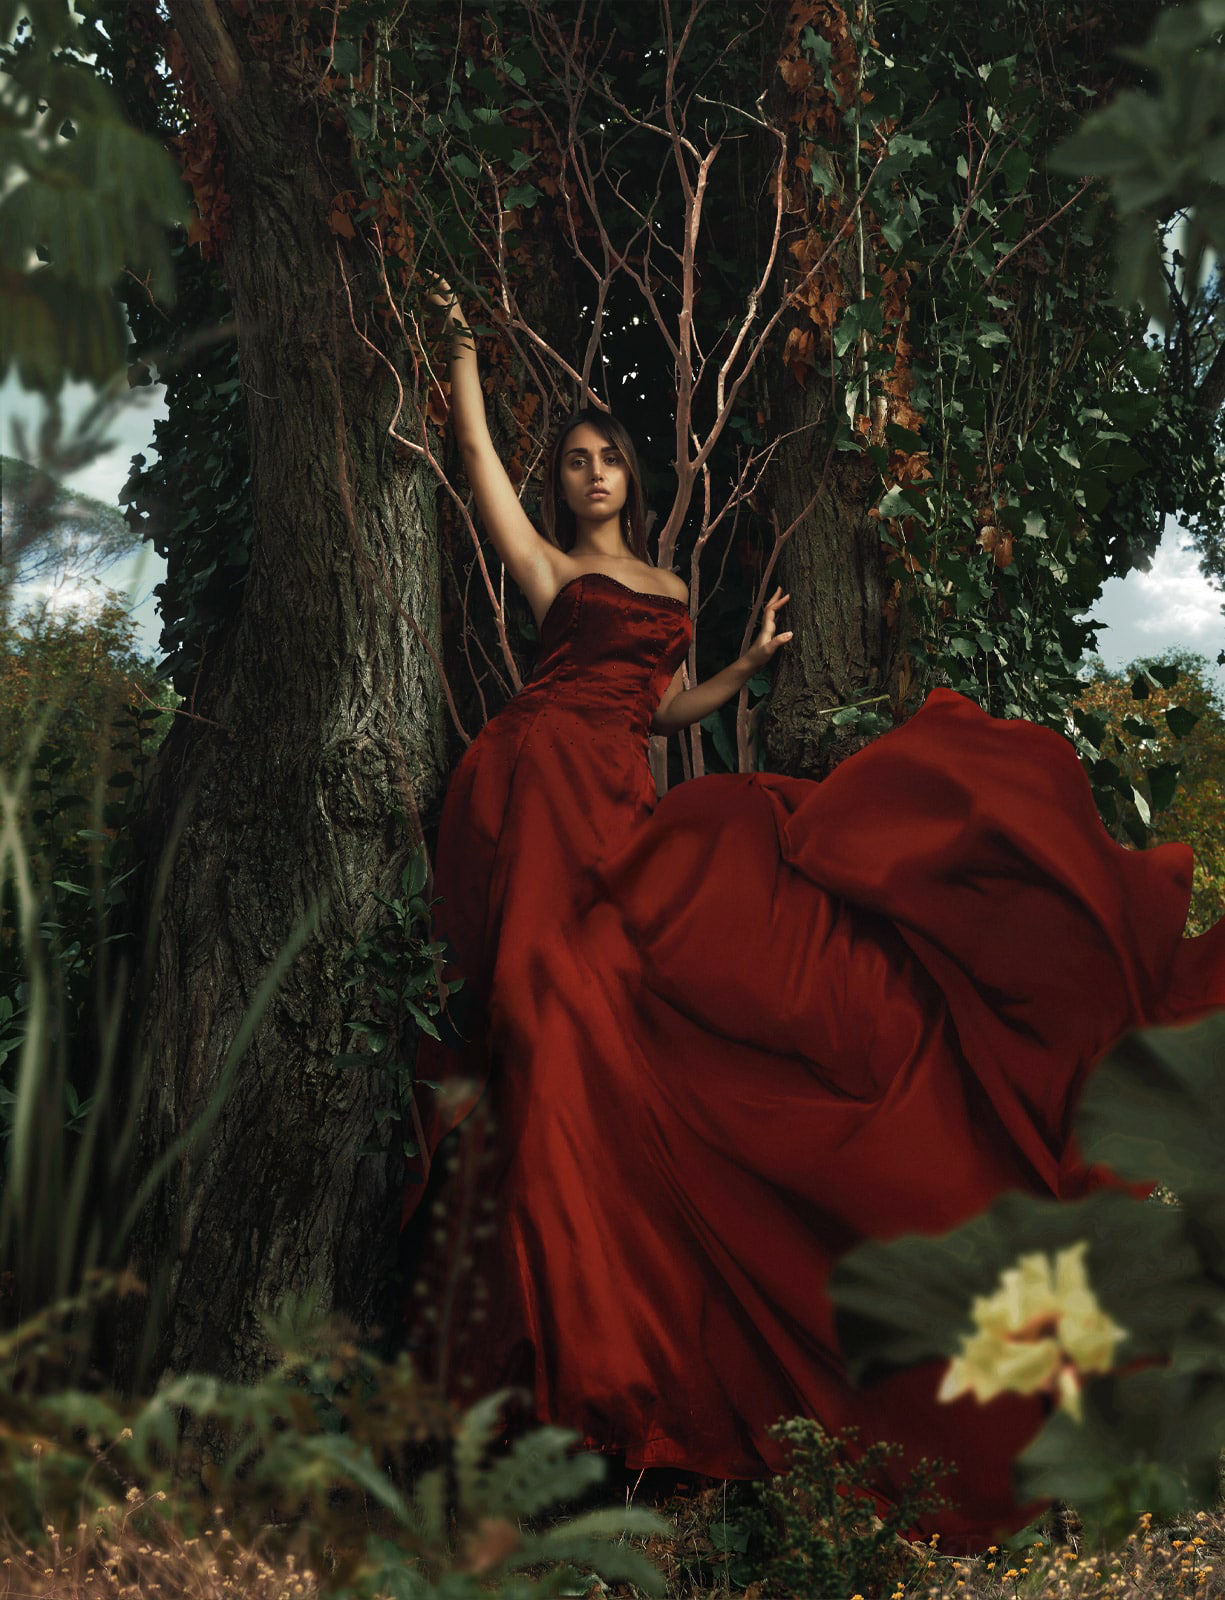 Painterly image of a model wearing a red dress surrounded by nature 